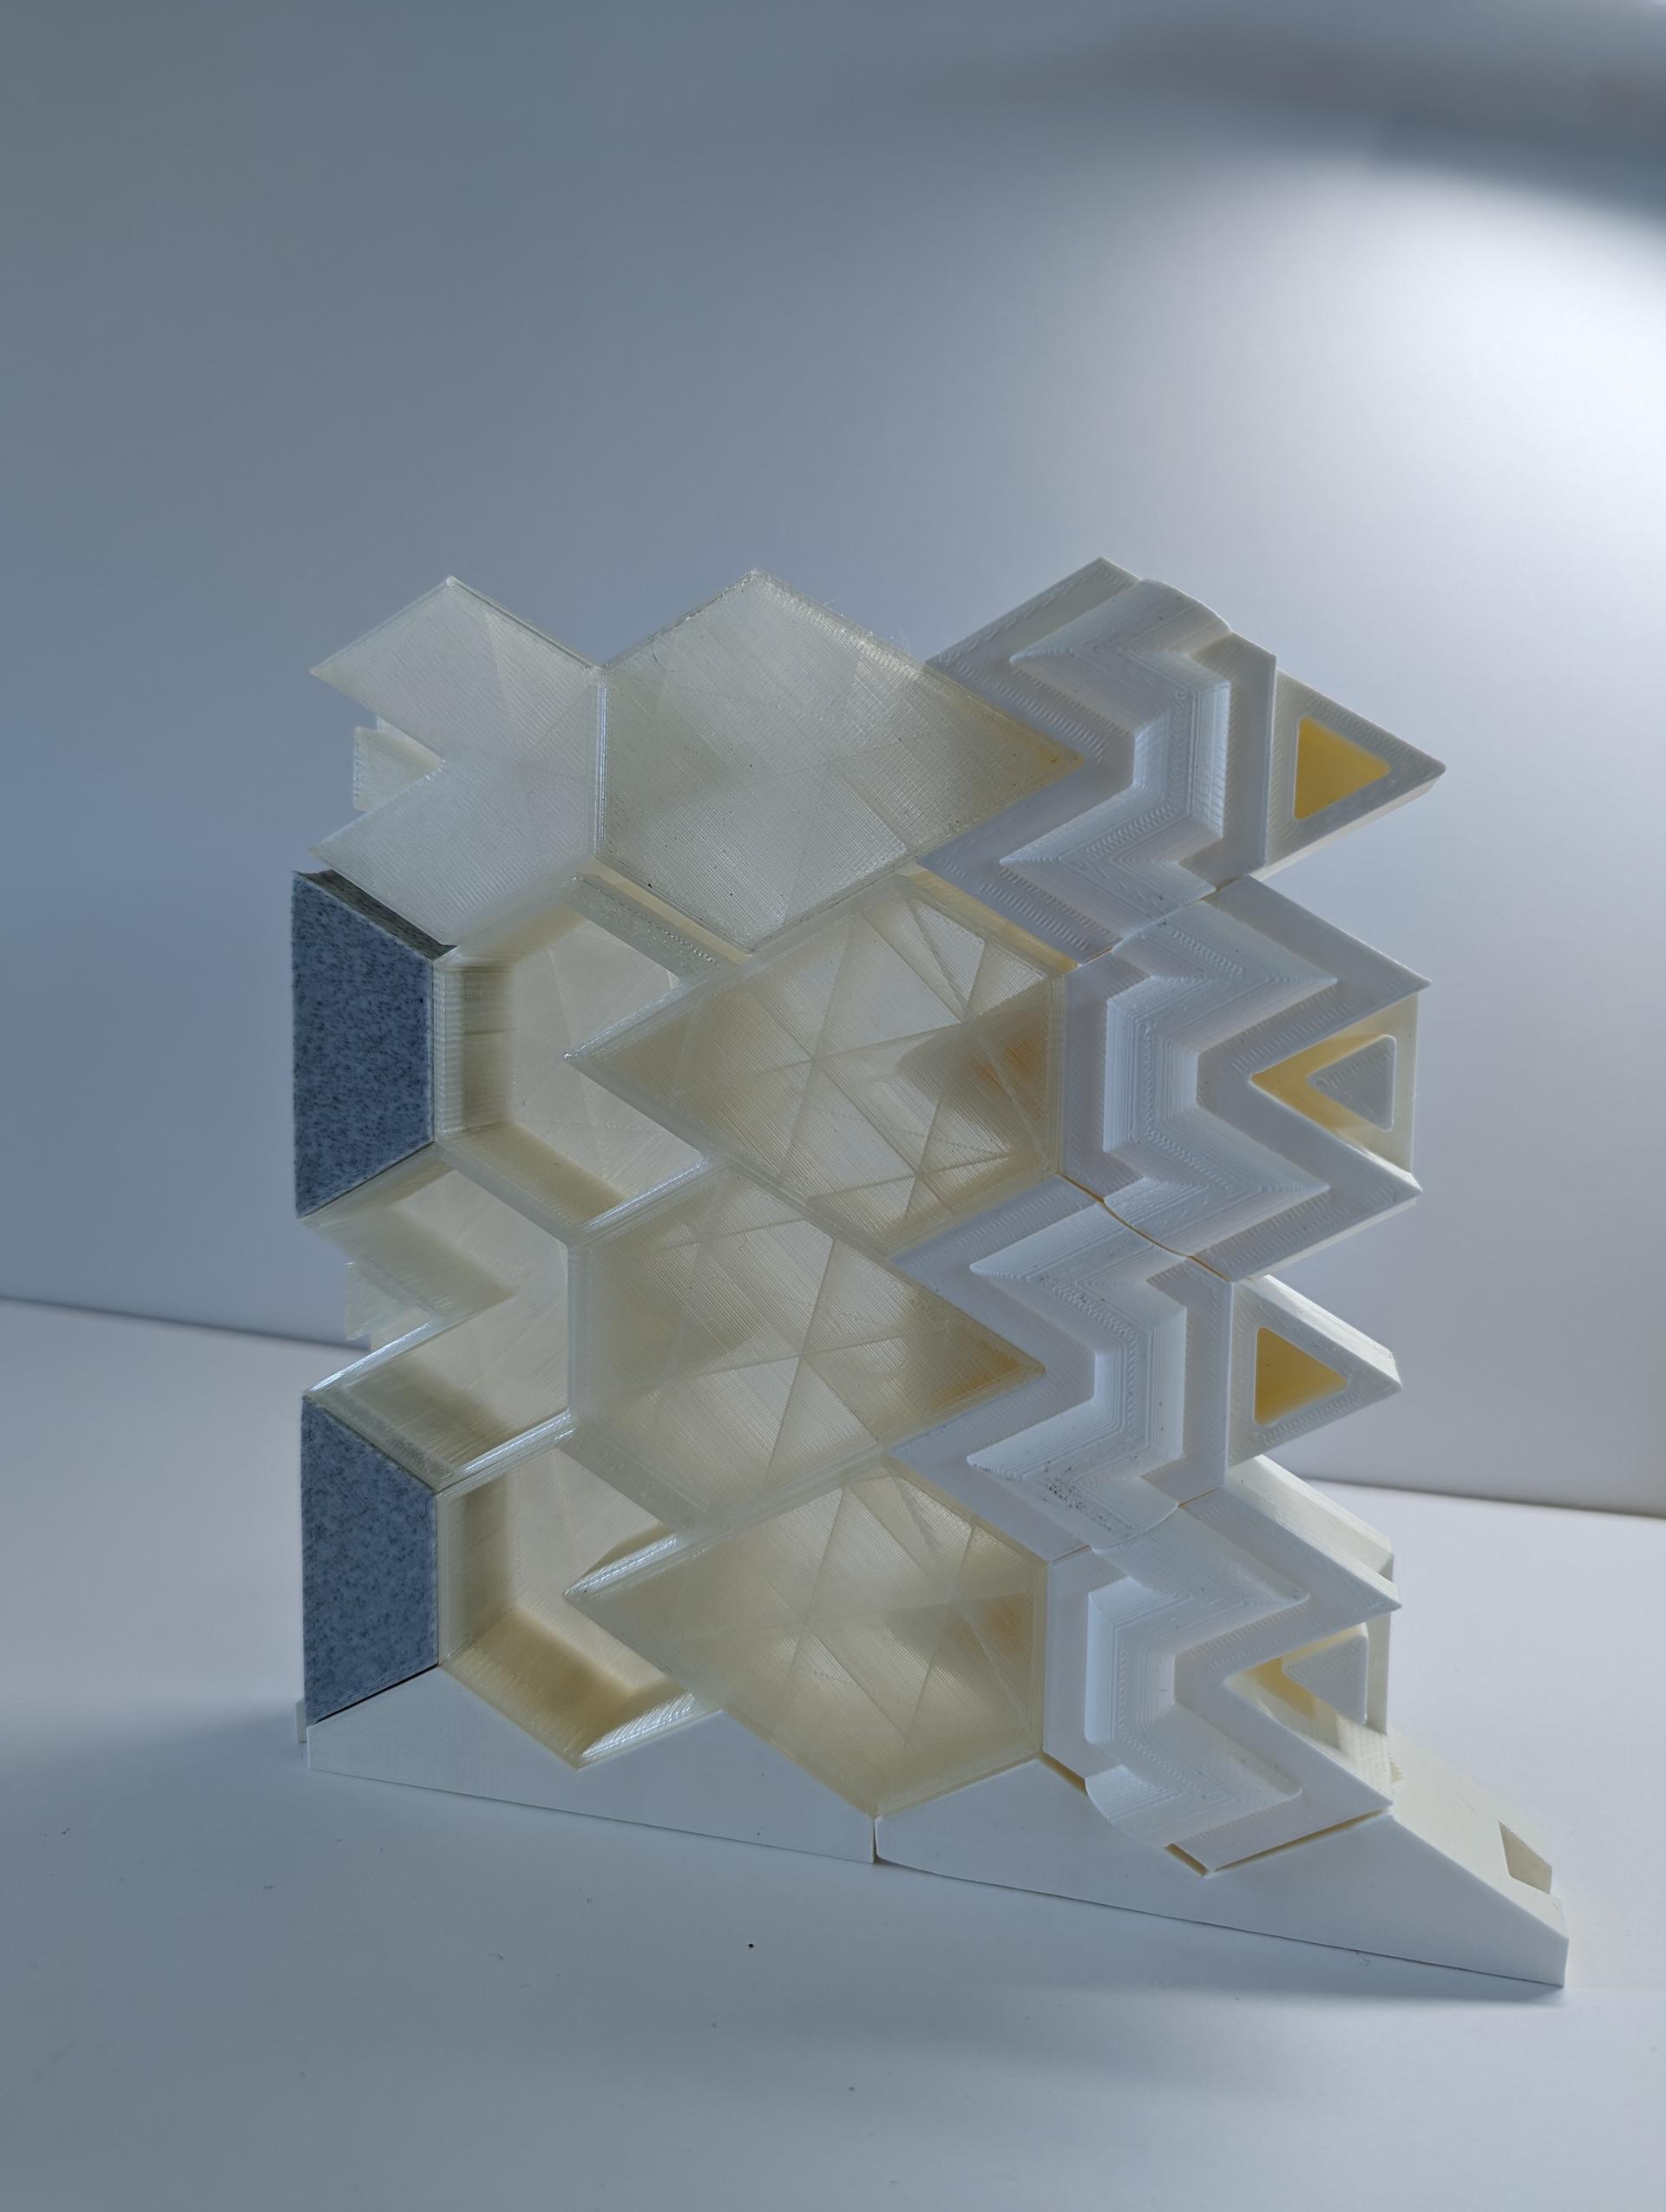 Hexagon based building blocks made from translucent filament are stacked as a scale wall assembly.